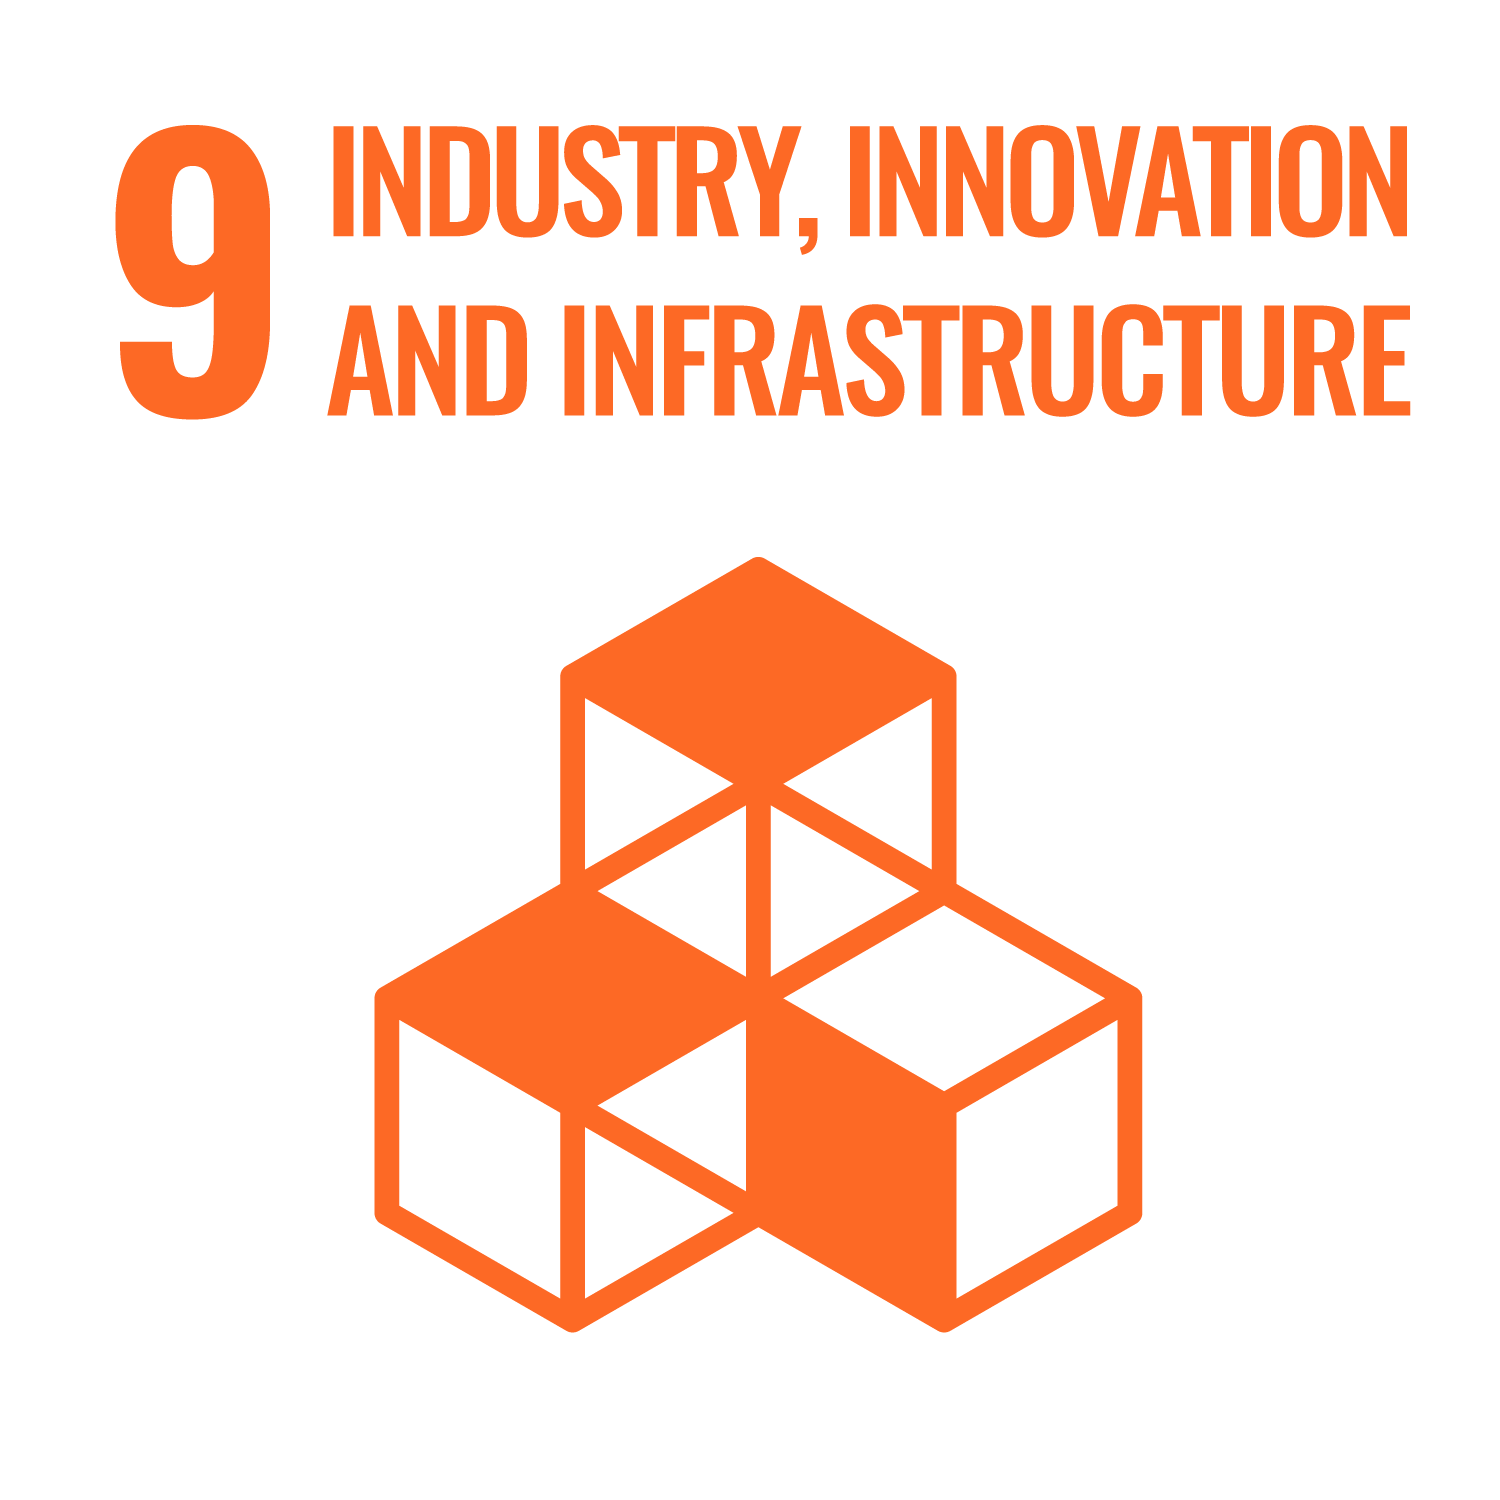 INDUSTRY, INNOVATION, AND INFRASTRUCTURE